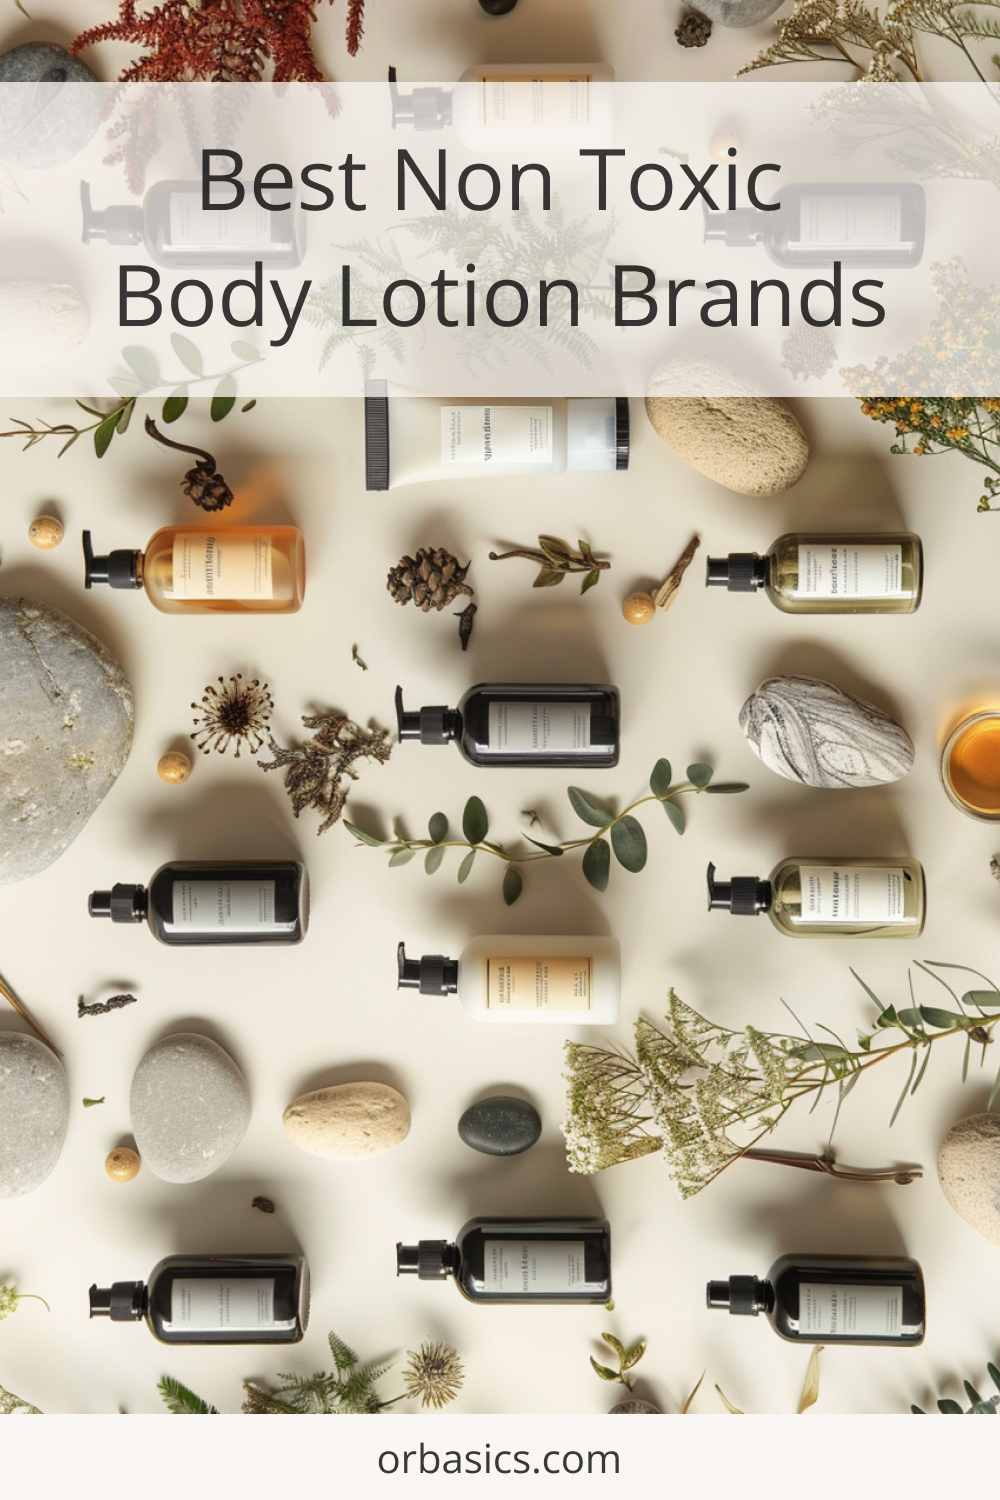 Non-Toxic-Body-Lotion-brands